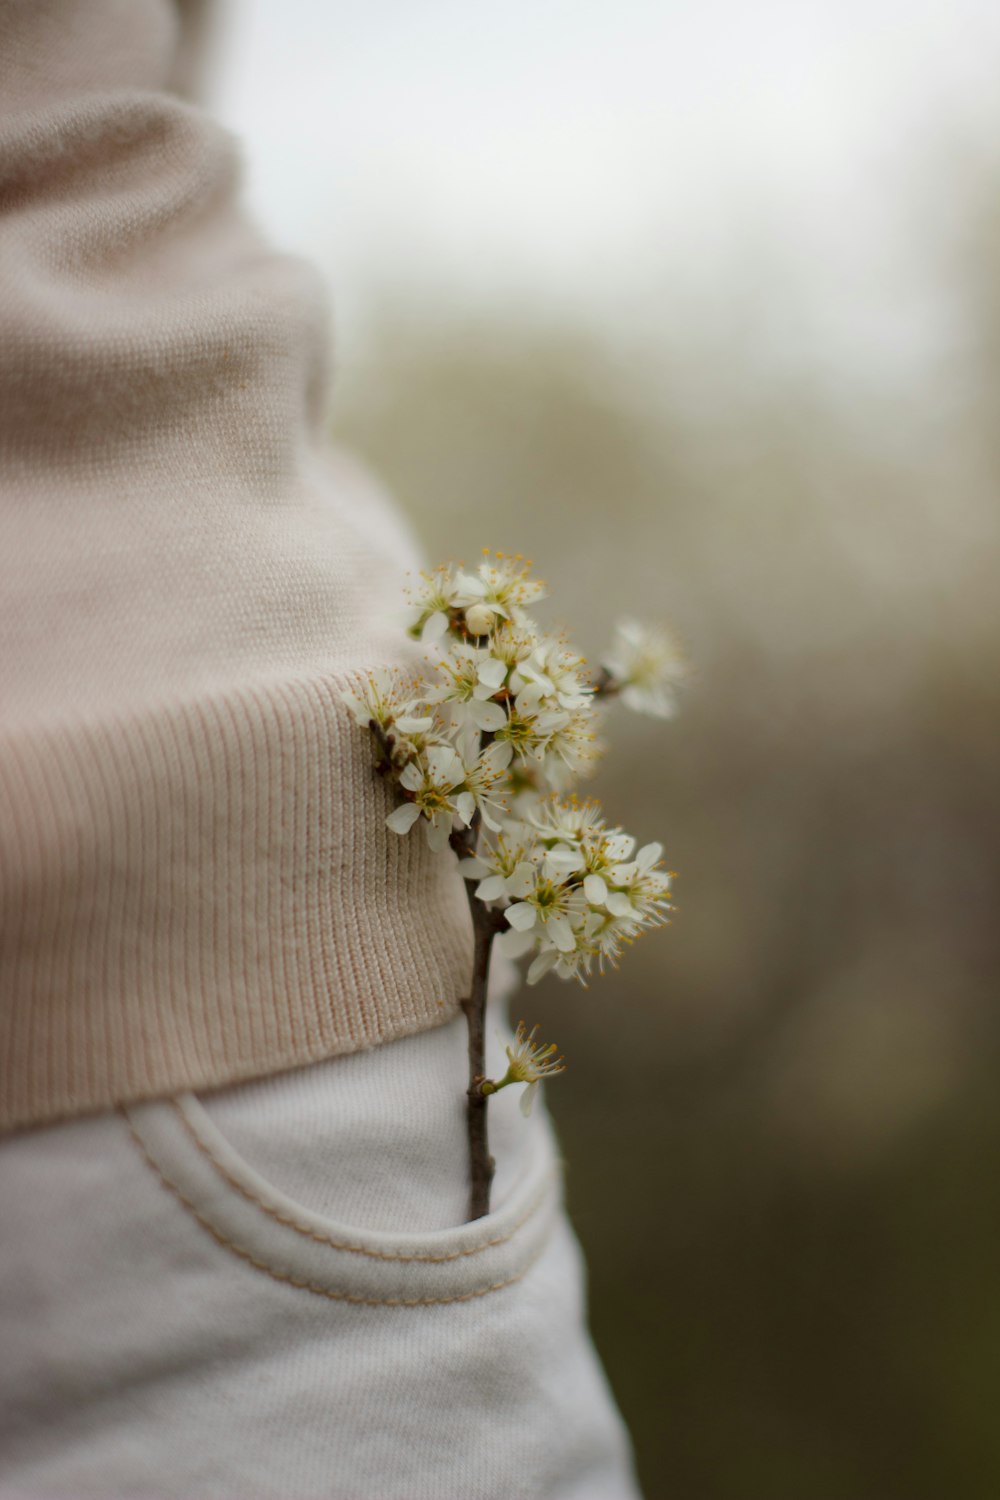 a small white flower sticking out of the pocket of someone's pants